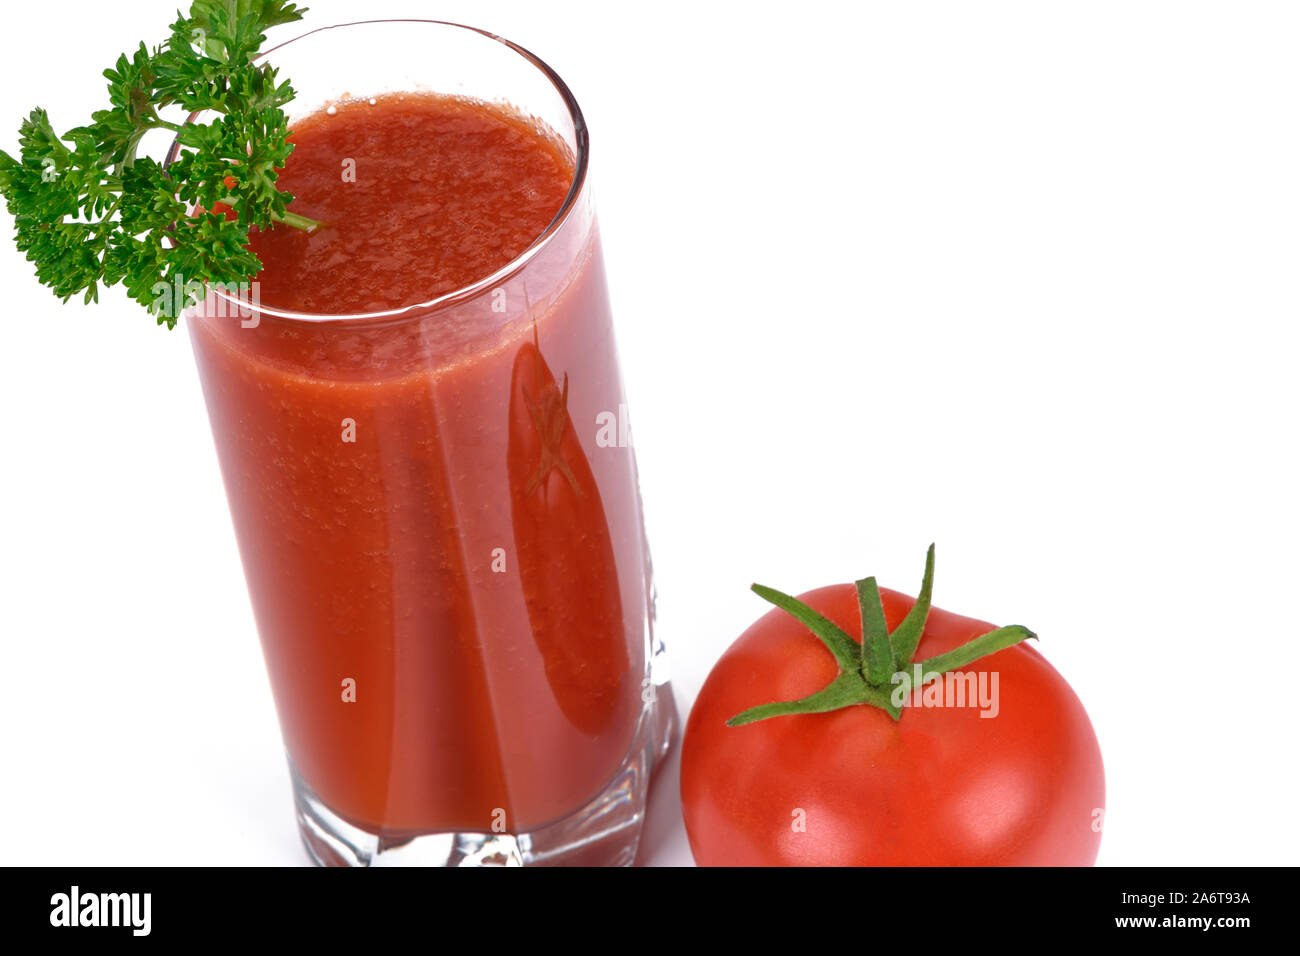 Healthy eating concept - juice from fresh tomatoes with parsley in glass next to a whole tomato isolated on a white background Stock Photo